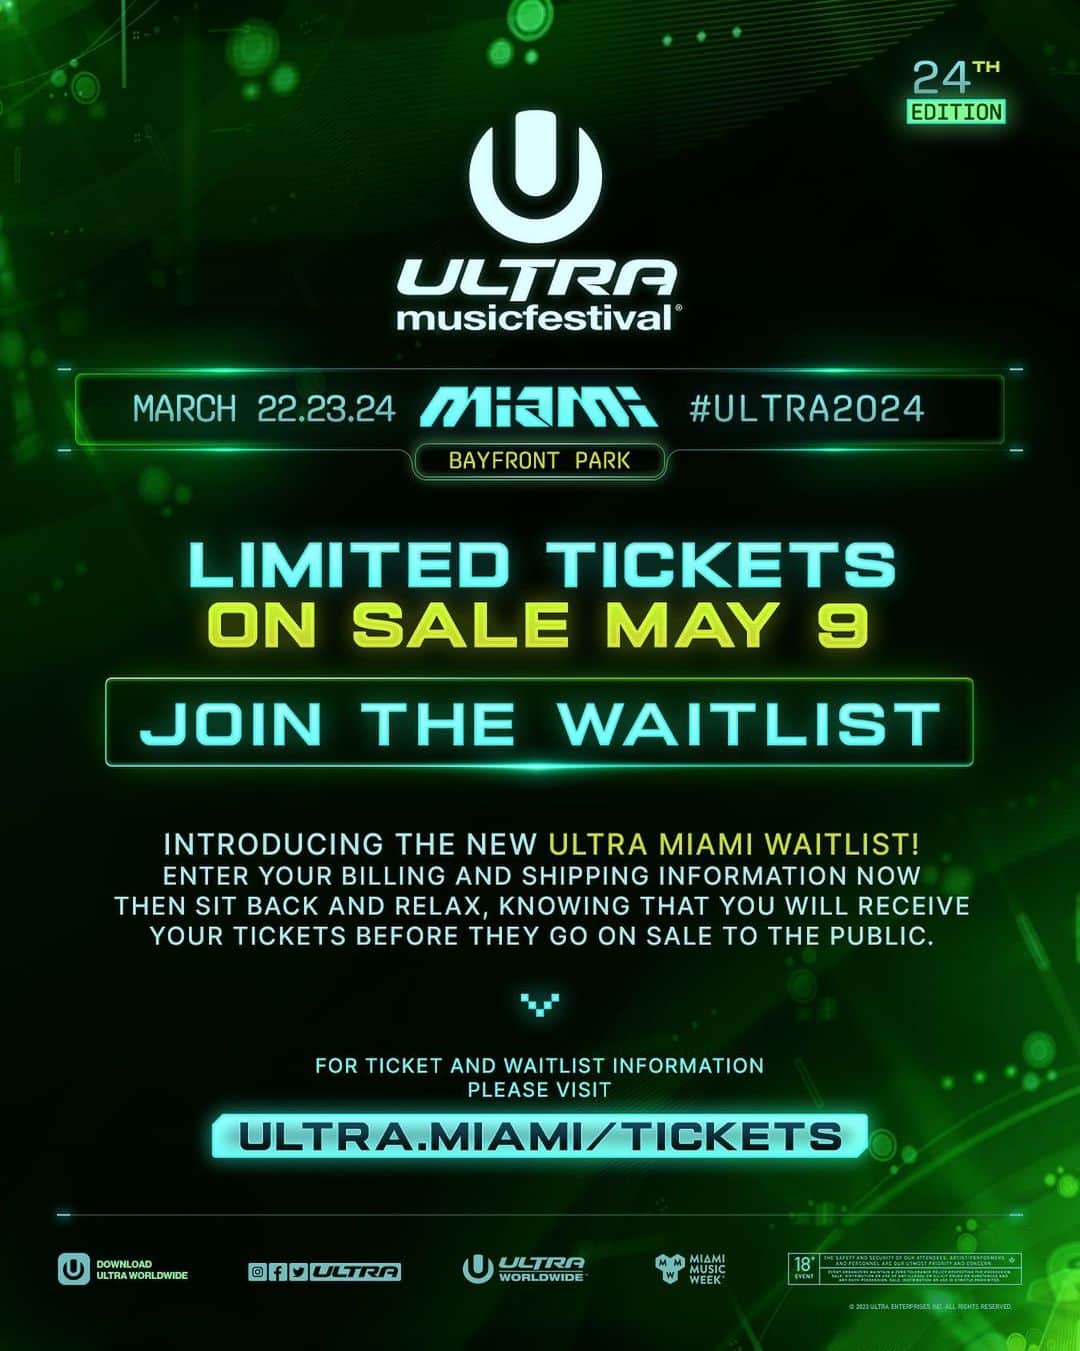 Ultra Music Festivalのインスタグラム：「ULTRA MIAMI WAITLIST NOW OPEN!  Introducing the new Ultra Miami waitlist! Enter your billing and shipping information now then sit back and relax, knowing that you will receive your tickets before they go on sale to the public. See you in 2024!  Limited Tickets to #Ultra2024 go on sale May 9th!   Join the Waitlist at ultra.miami/tickets」